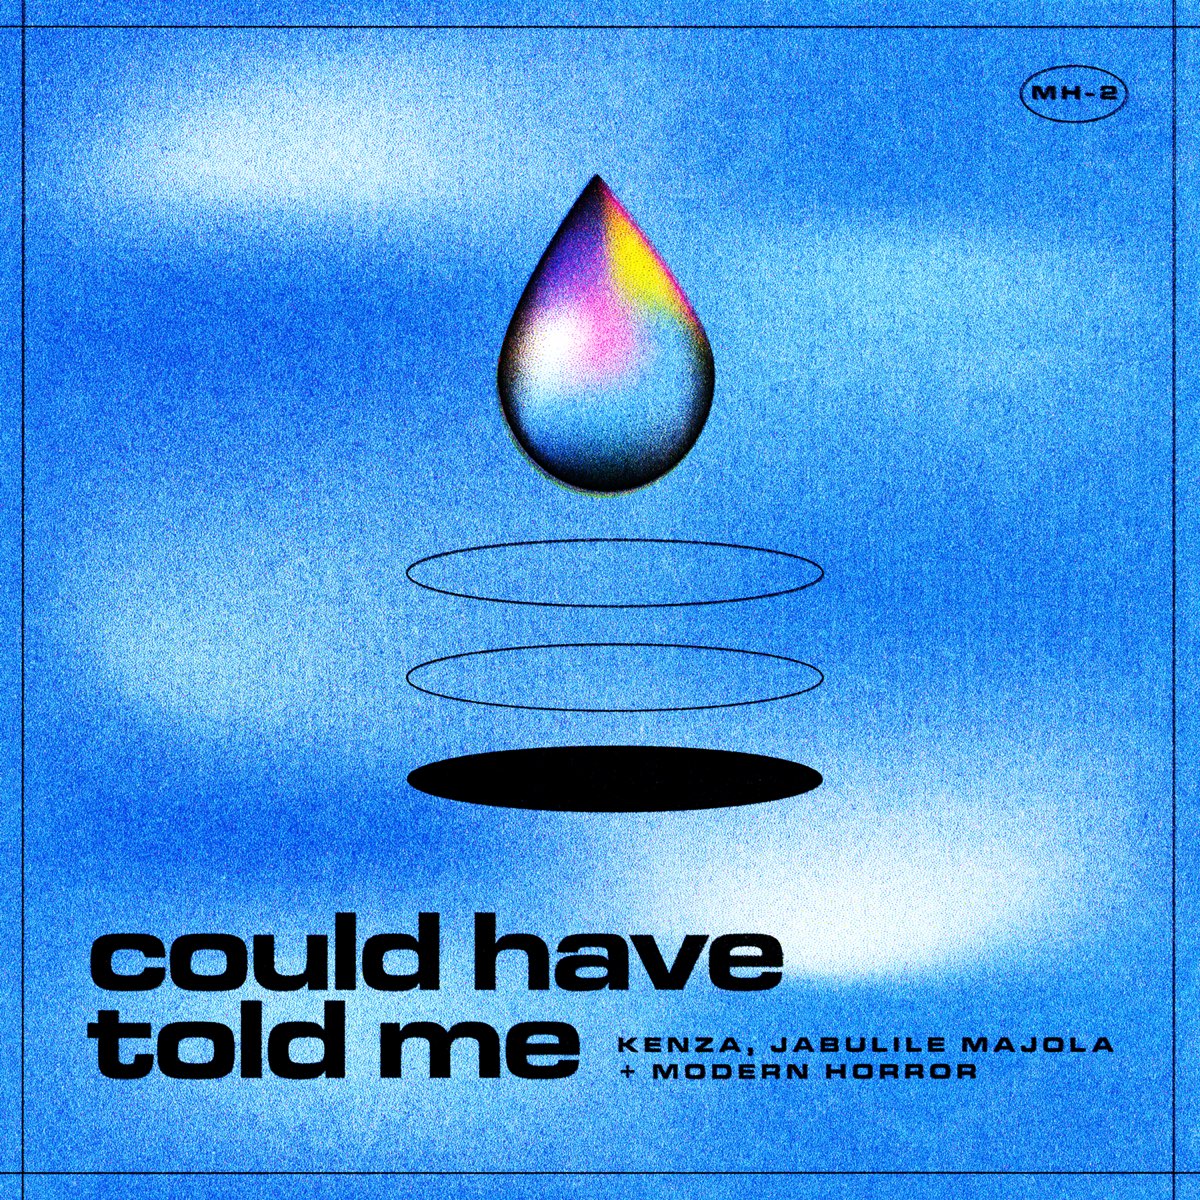 ‎could have told me - EP - Album by Kenza, Jabulile Majola & Modern ...